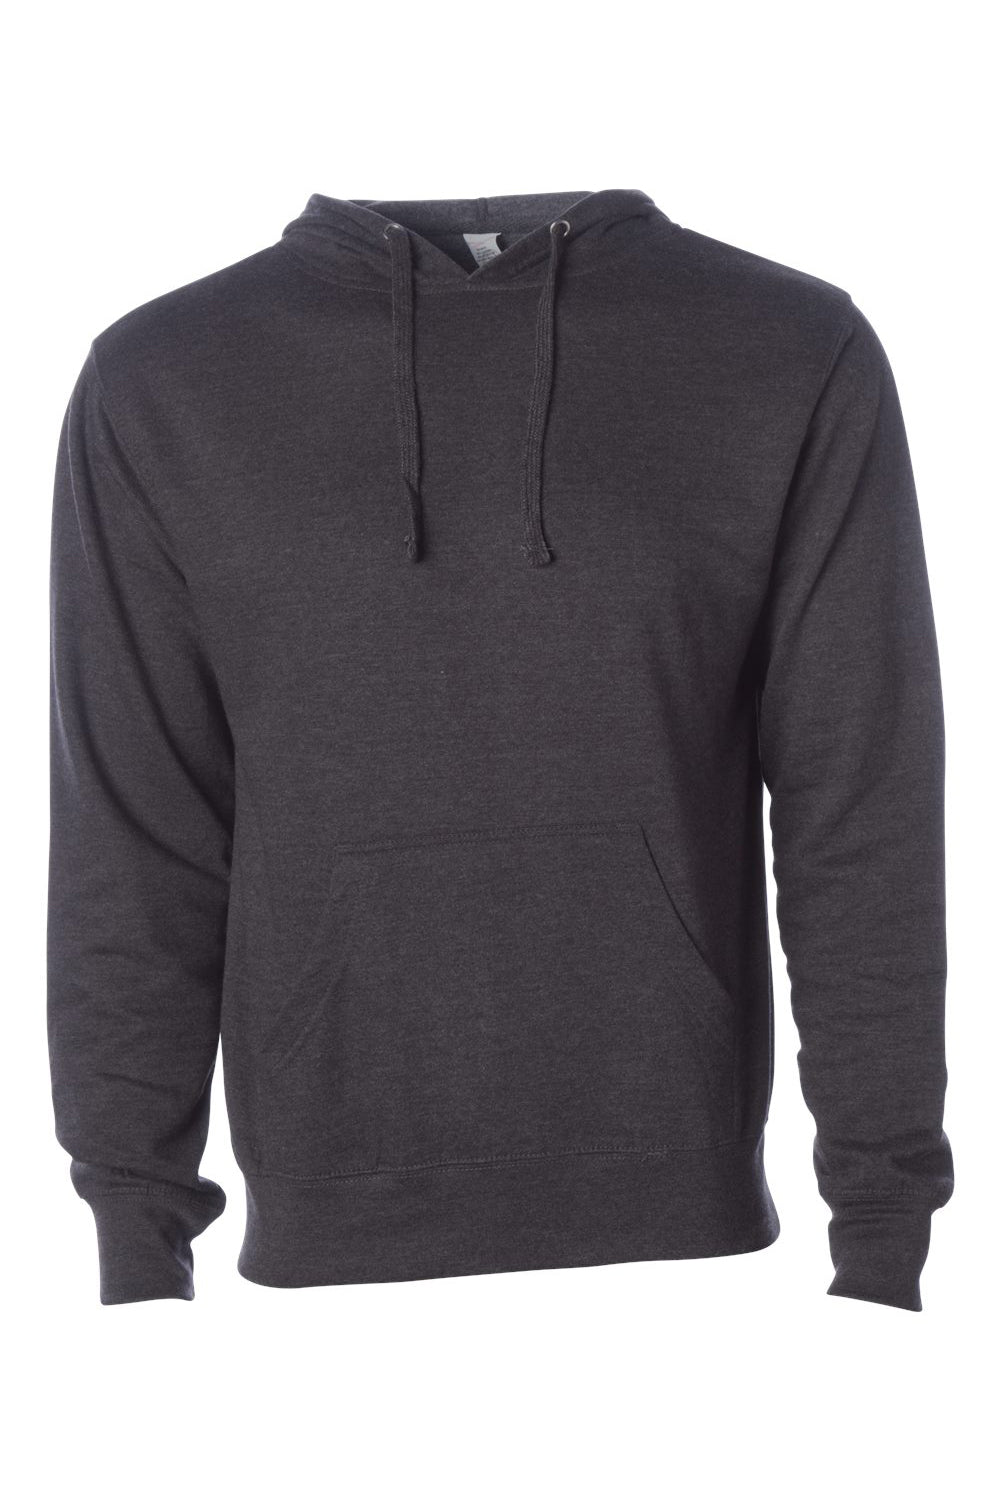 Independent Trading Co. SS4500 Mens Hooded Sweatshirt Hoodie Heather Charcoal Grey Flat Front